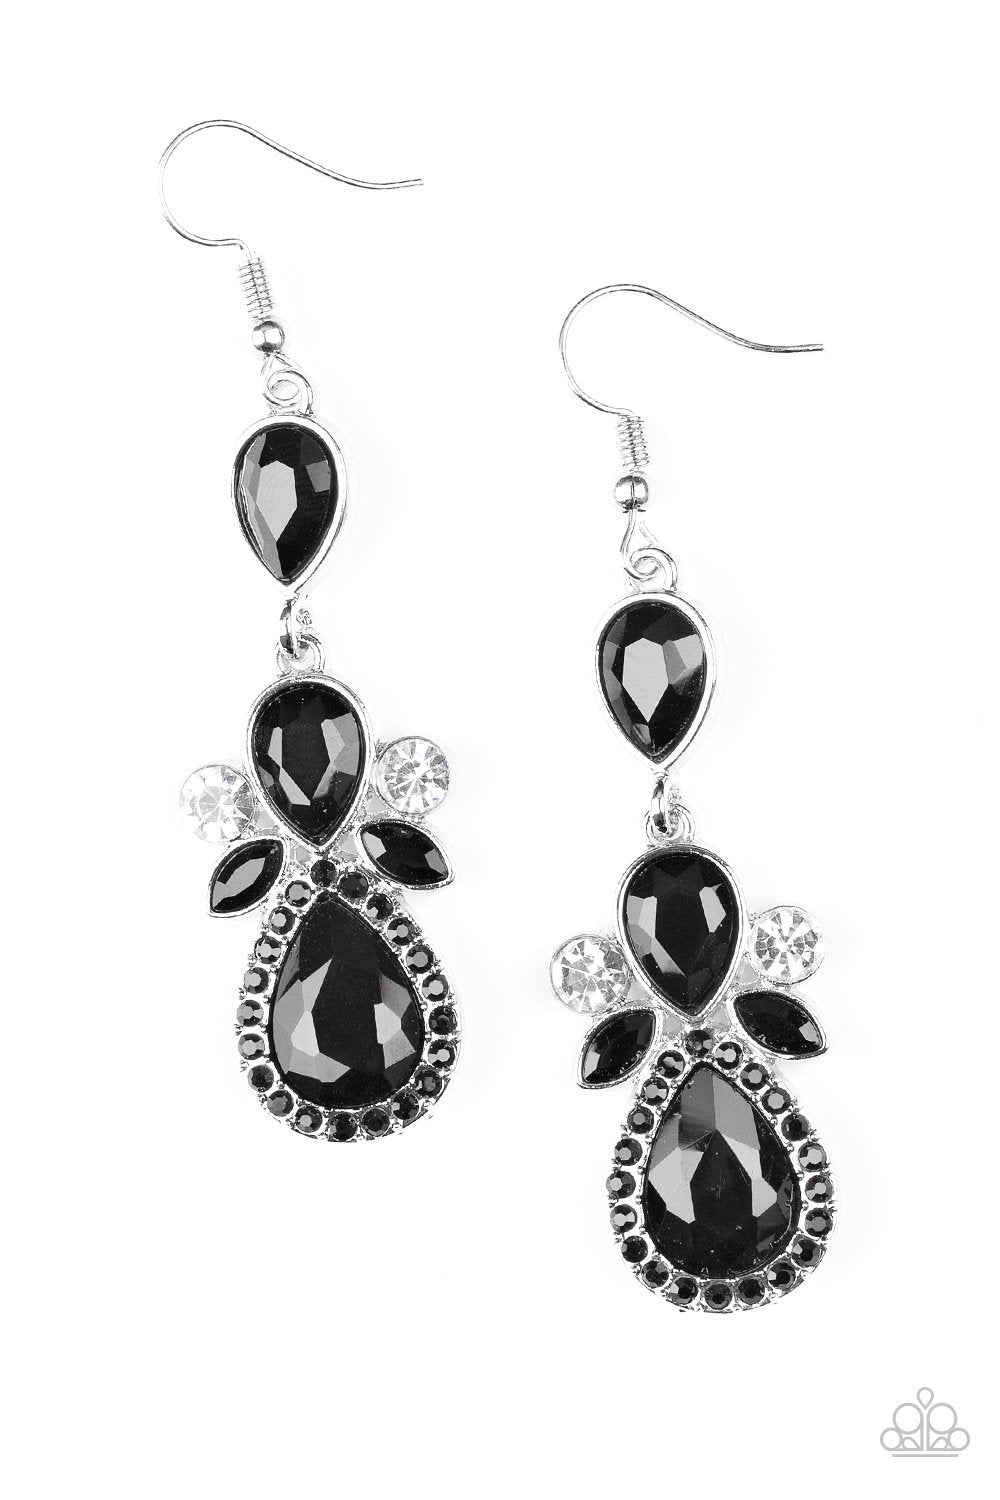 All About Glam Black Earrings - Paparazzi Accessories-CarasShop.com - $5 Jewelry by Cara Jewels